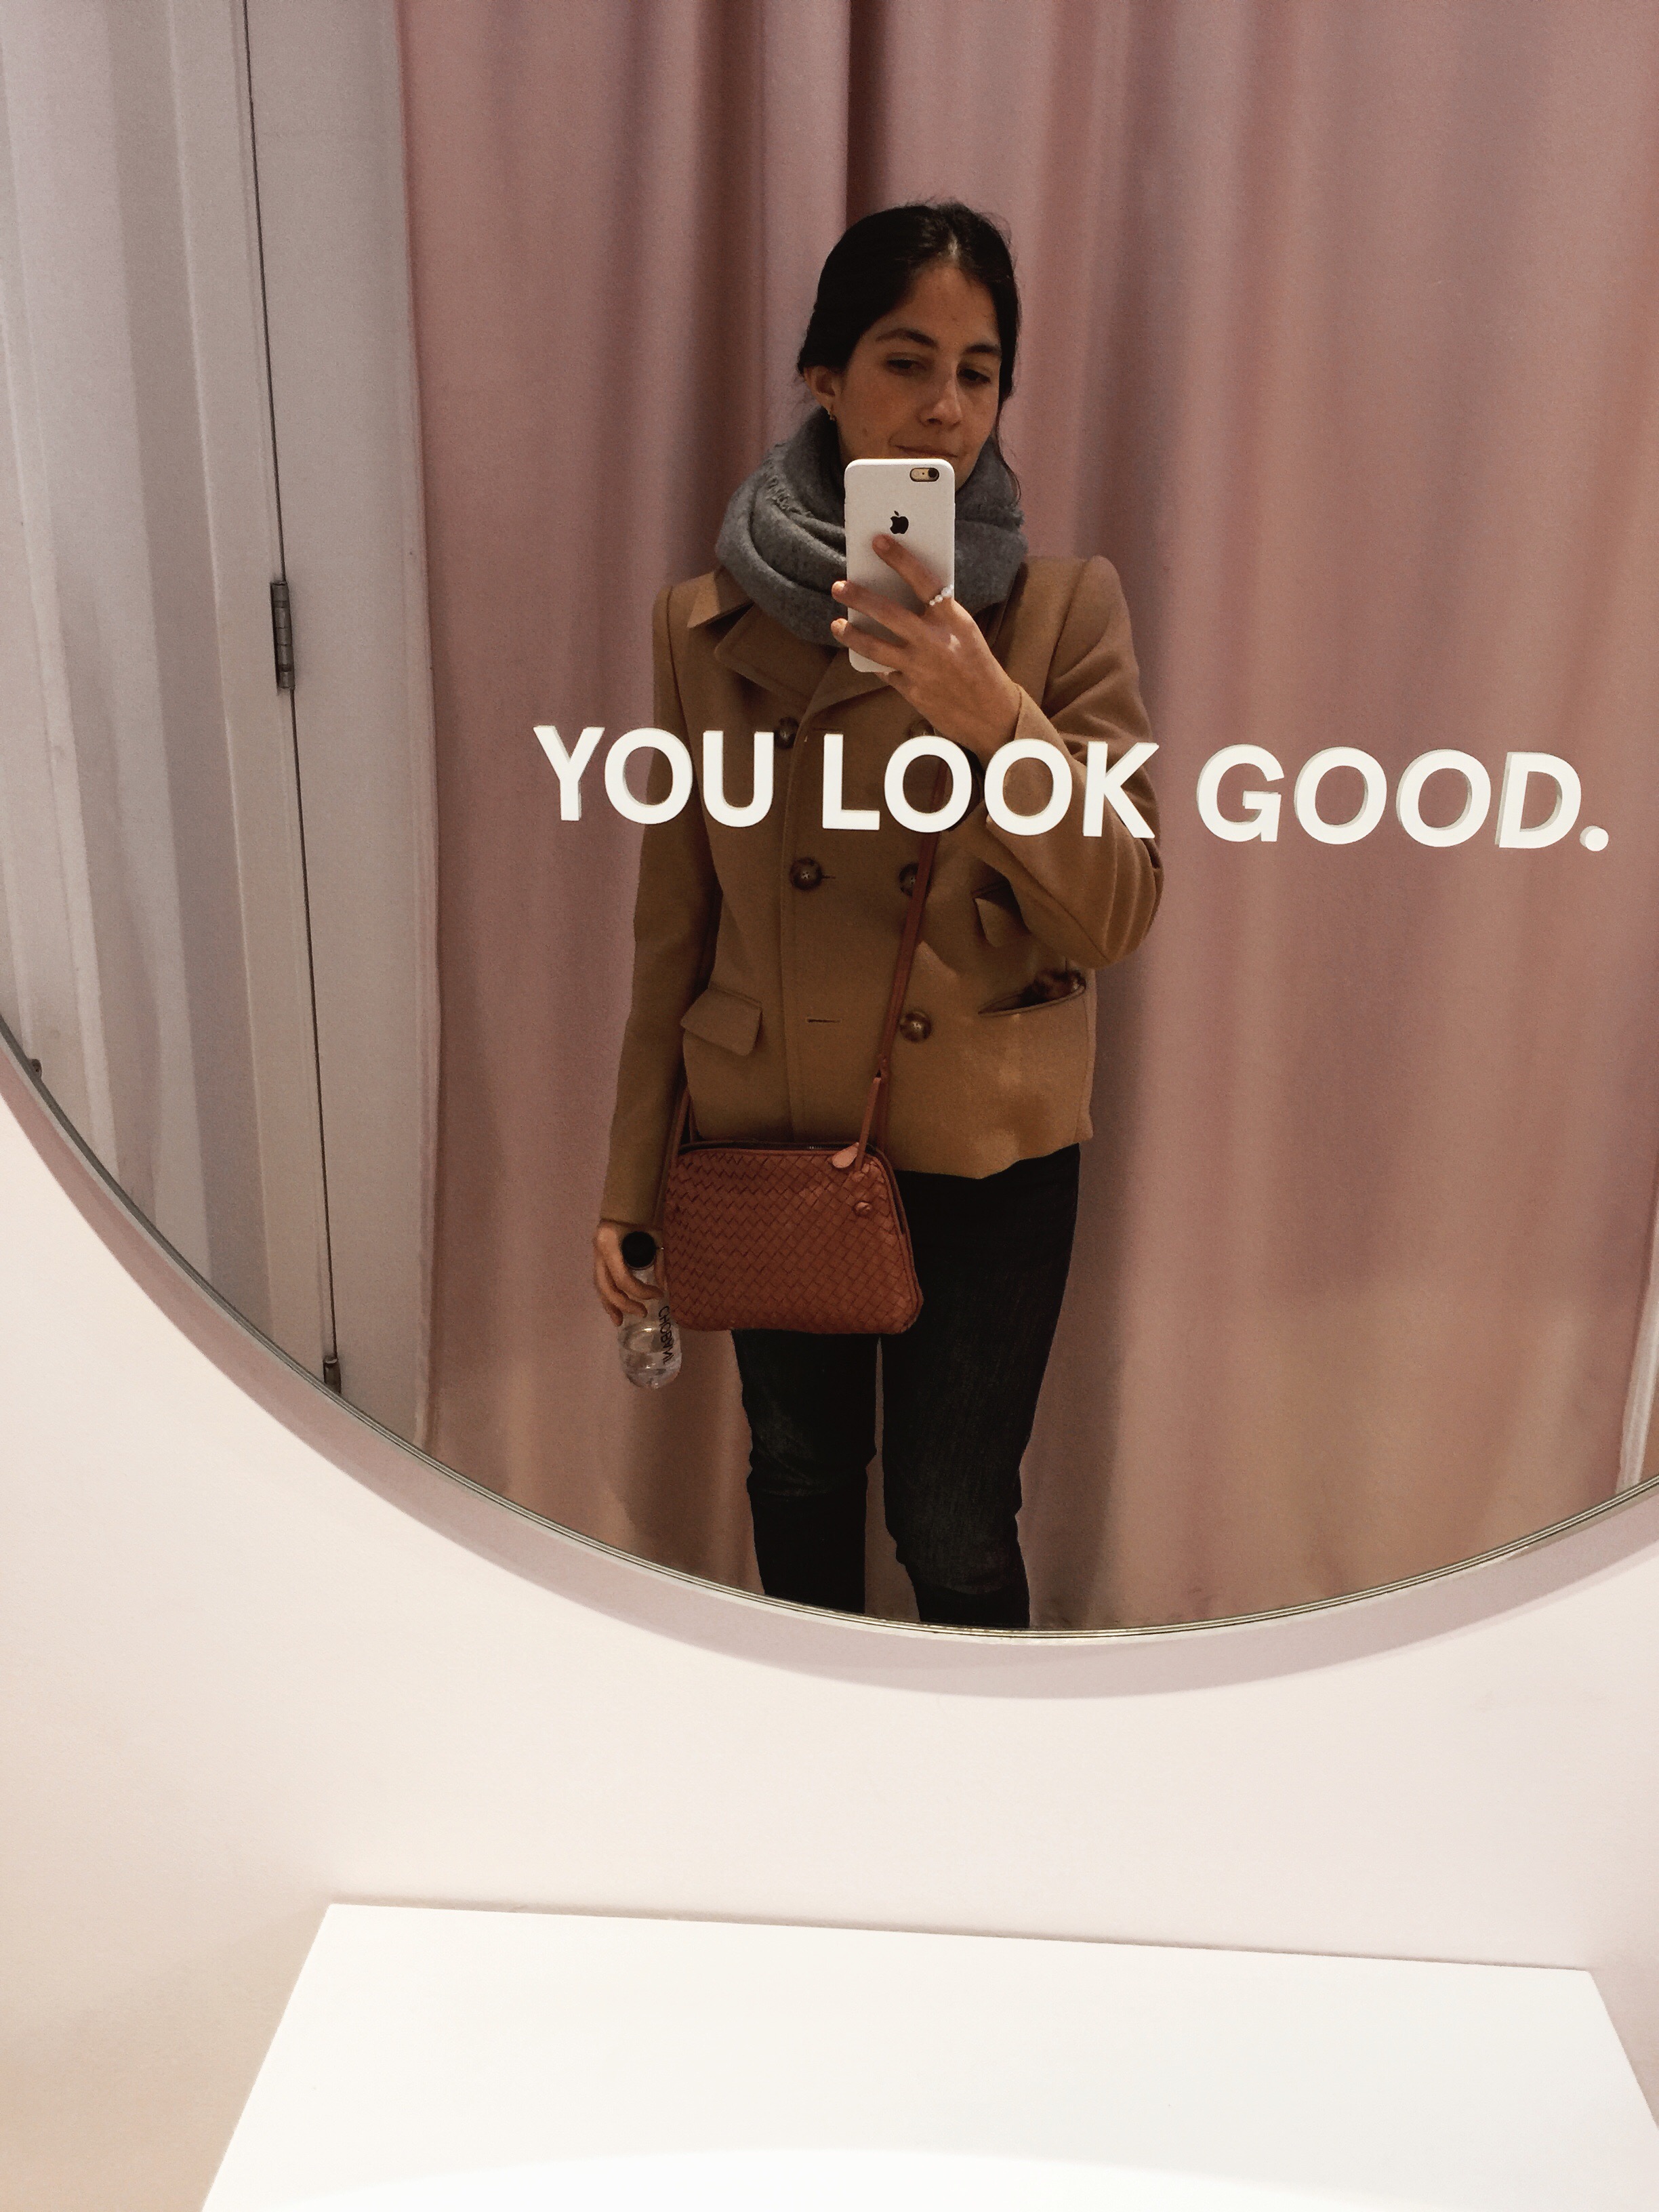  Our Editor, Rosa Zaborowsky, at Glossier   